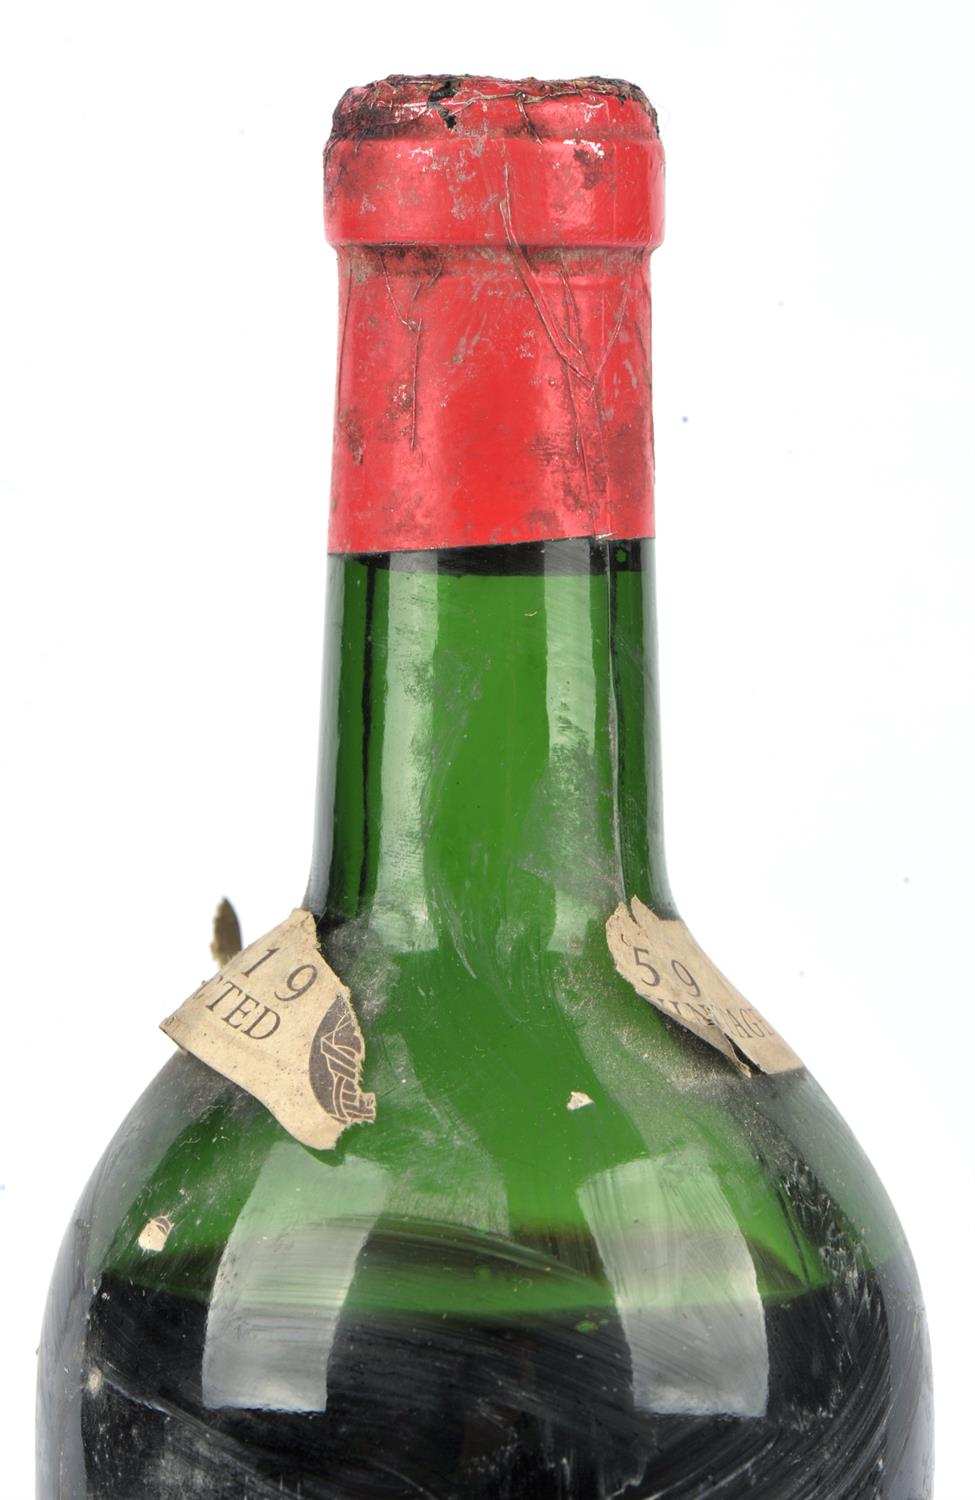 Bordeaux wine, Chateau Cheval Blanc, Avery, 1959, one bottle, levels to low shoulder, - Image 3 of 3